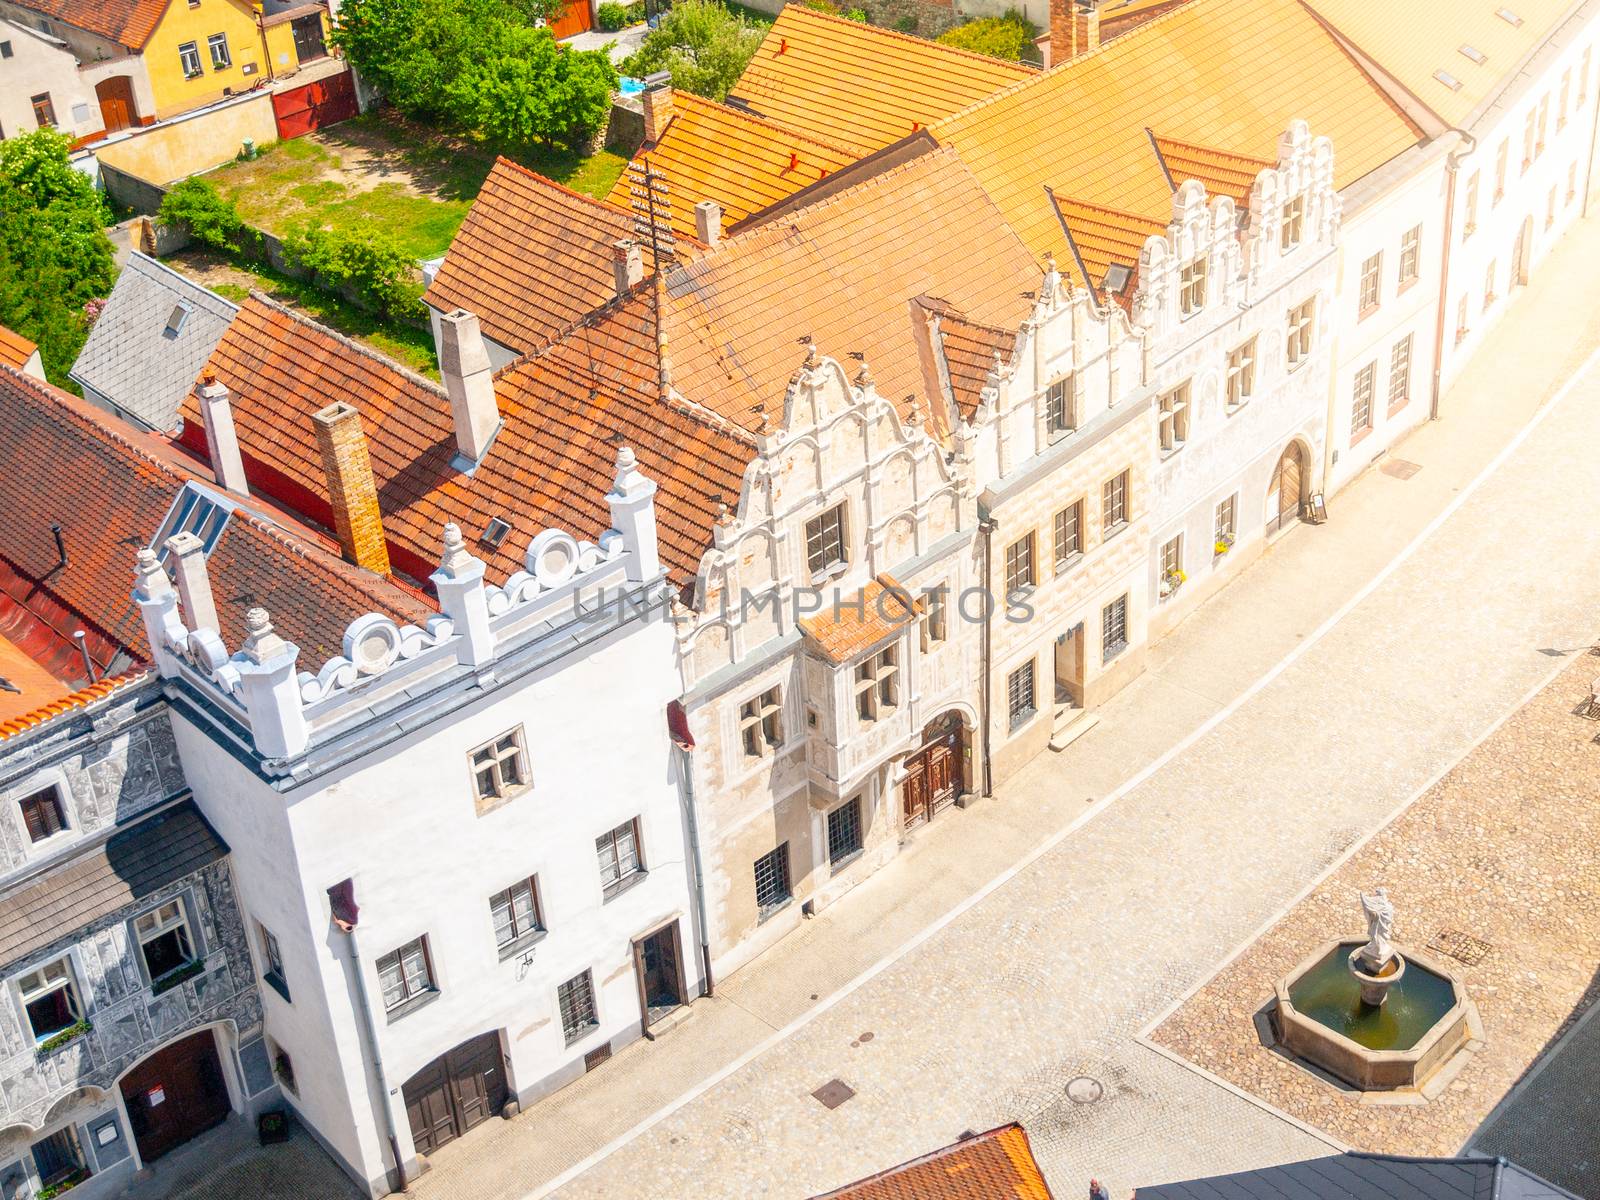 Aerial view of Renaissance houses in Slavonice, Czech Republic.